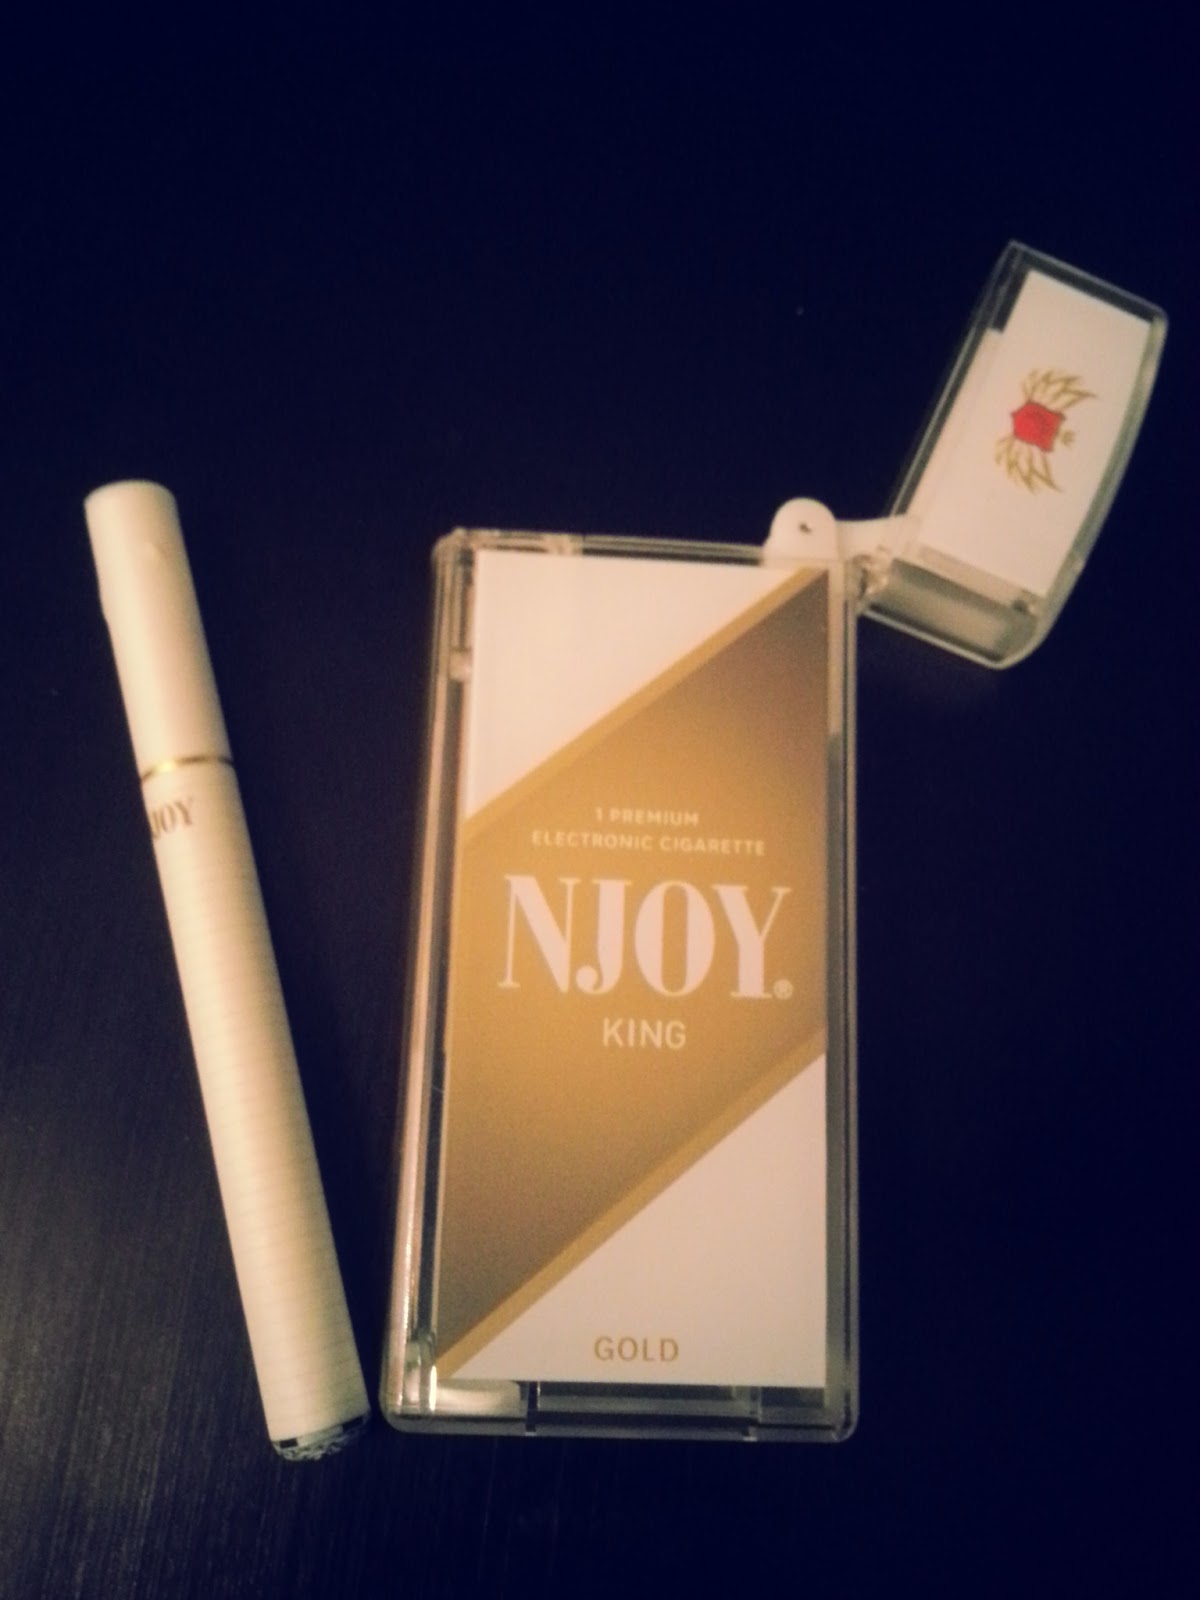 The Njoy King Review, Its that GOOD......And BAD - e Cigarette Reviews ...